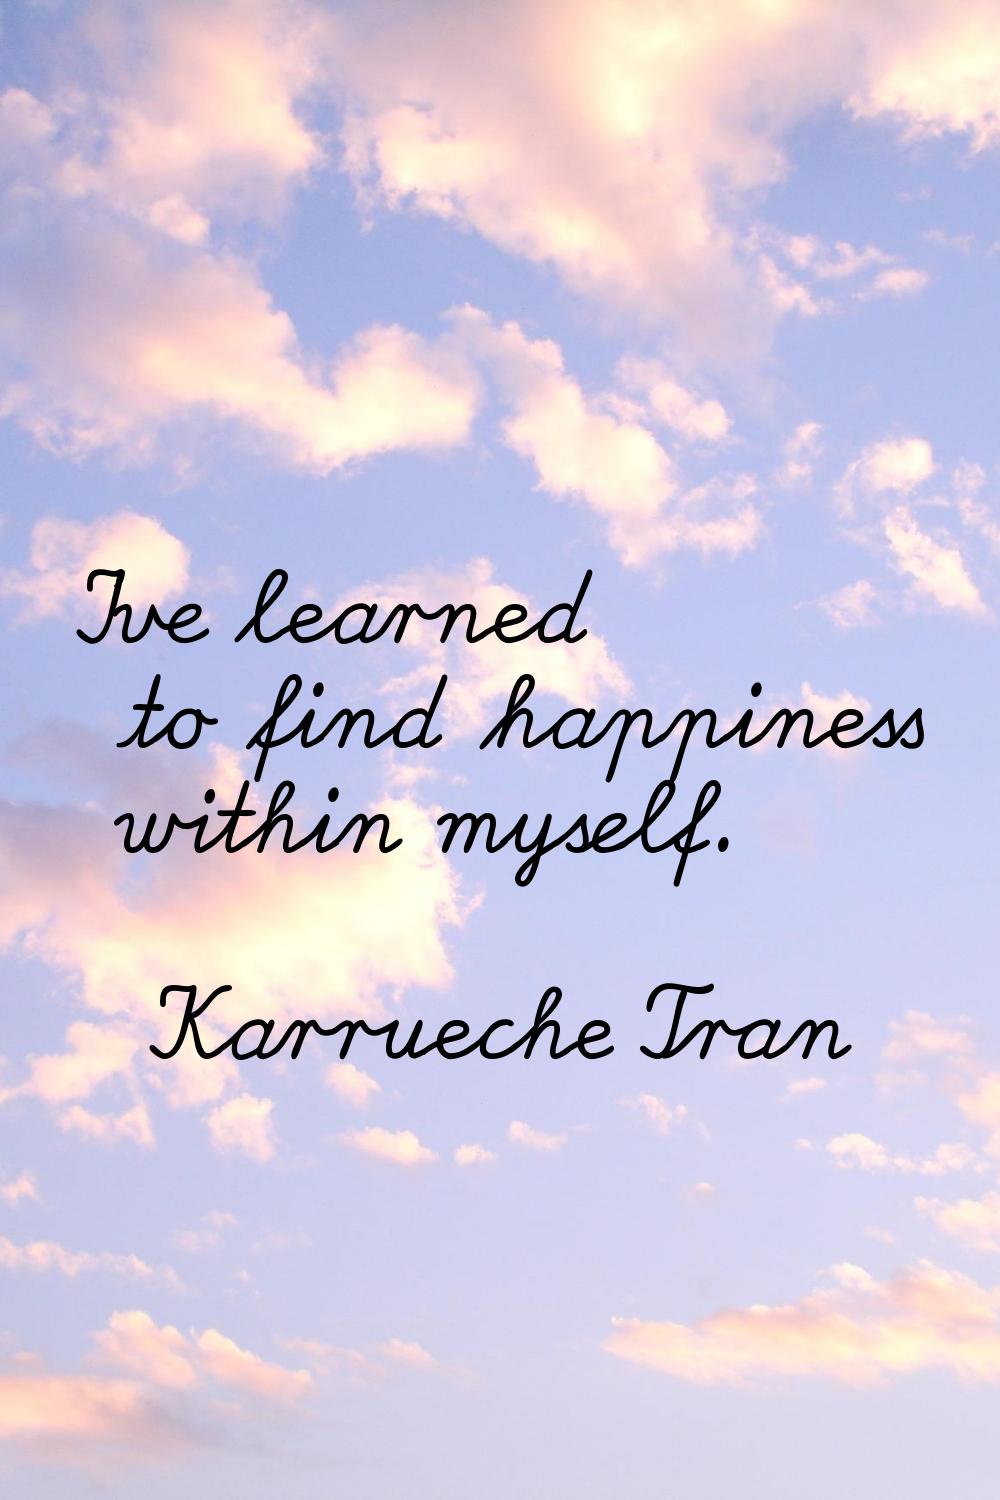 I've learned to find happiness within myself.